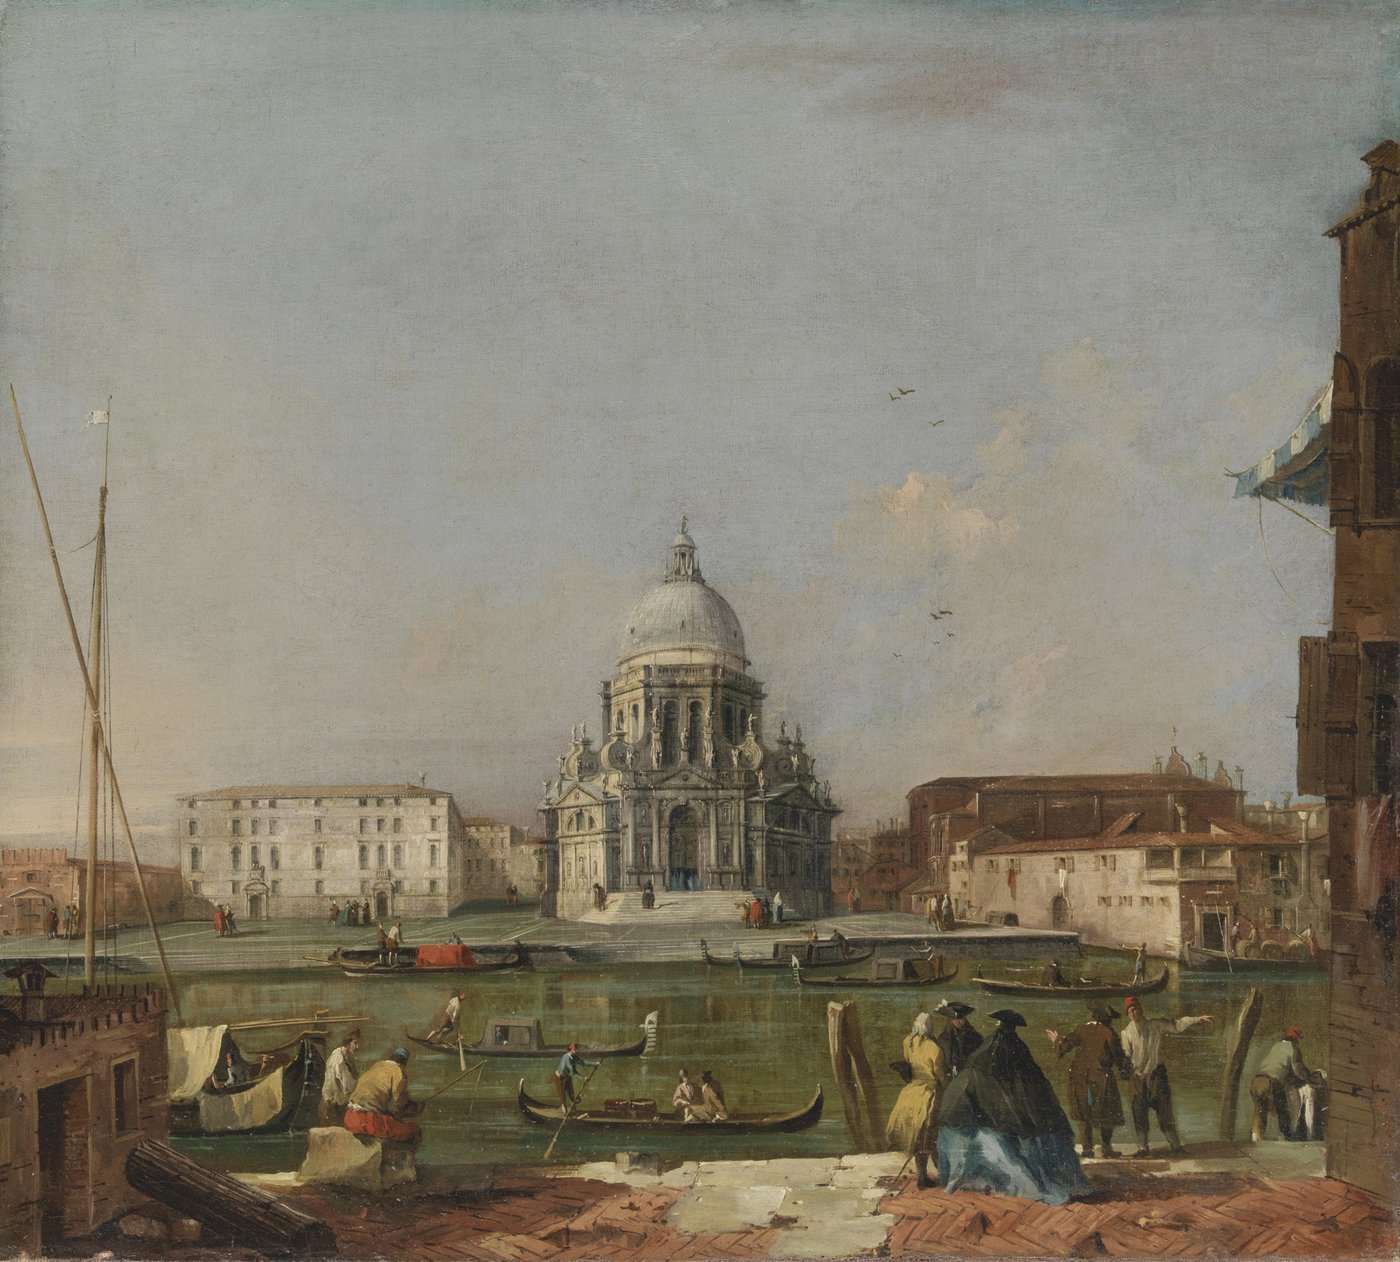 A historical painting of a Venetian city view on the canal. In the center of the picture a white church with a green dome surrounded by plain buildings. In the foreground are working people crossing the river on their boats and nobles in baroque clothes with hats standing together in a group.